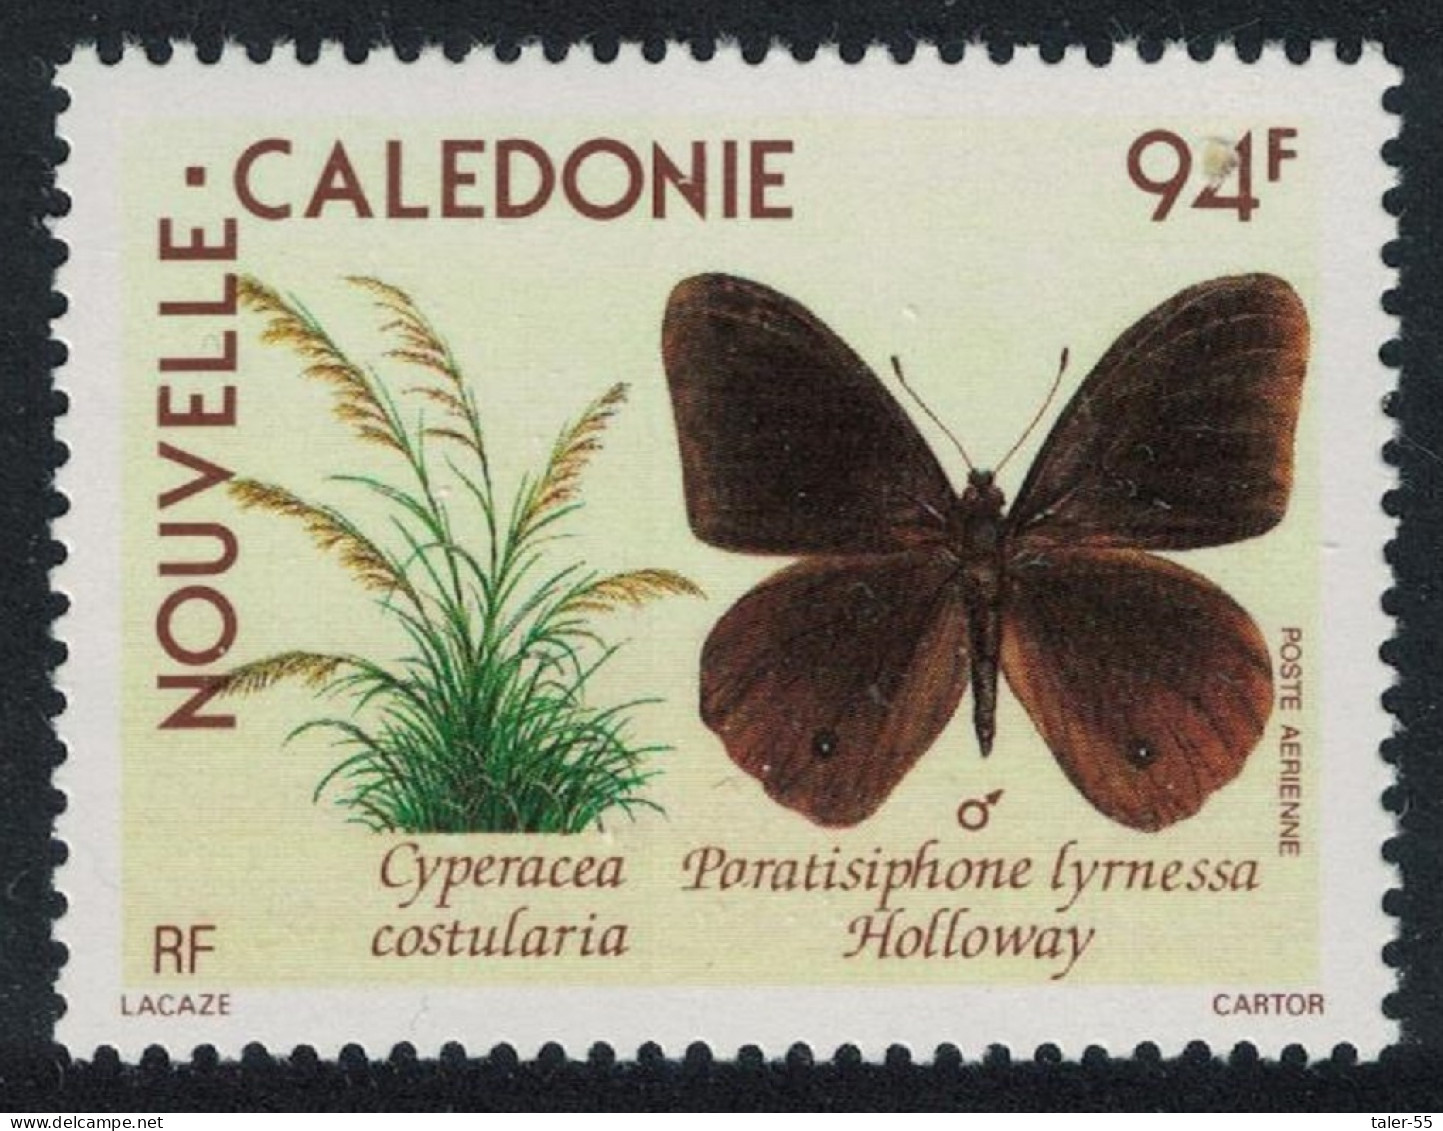 New Caledonia 'Paratisiphone Lyrnessa' Male Butterfly 1990 MNH SG#876 - Neufs